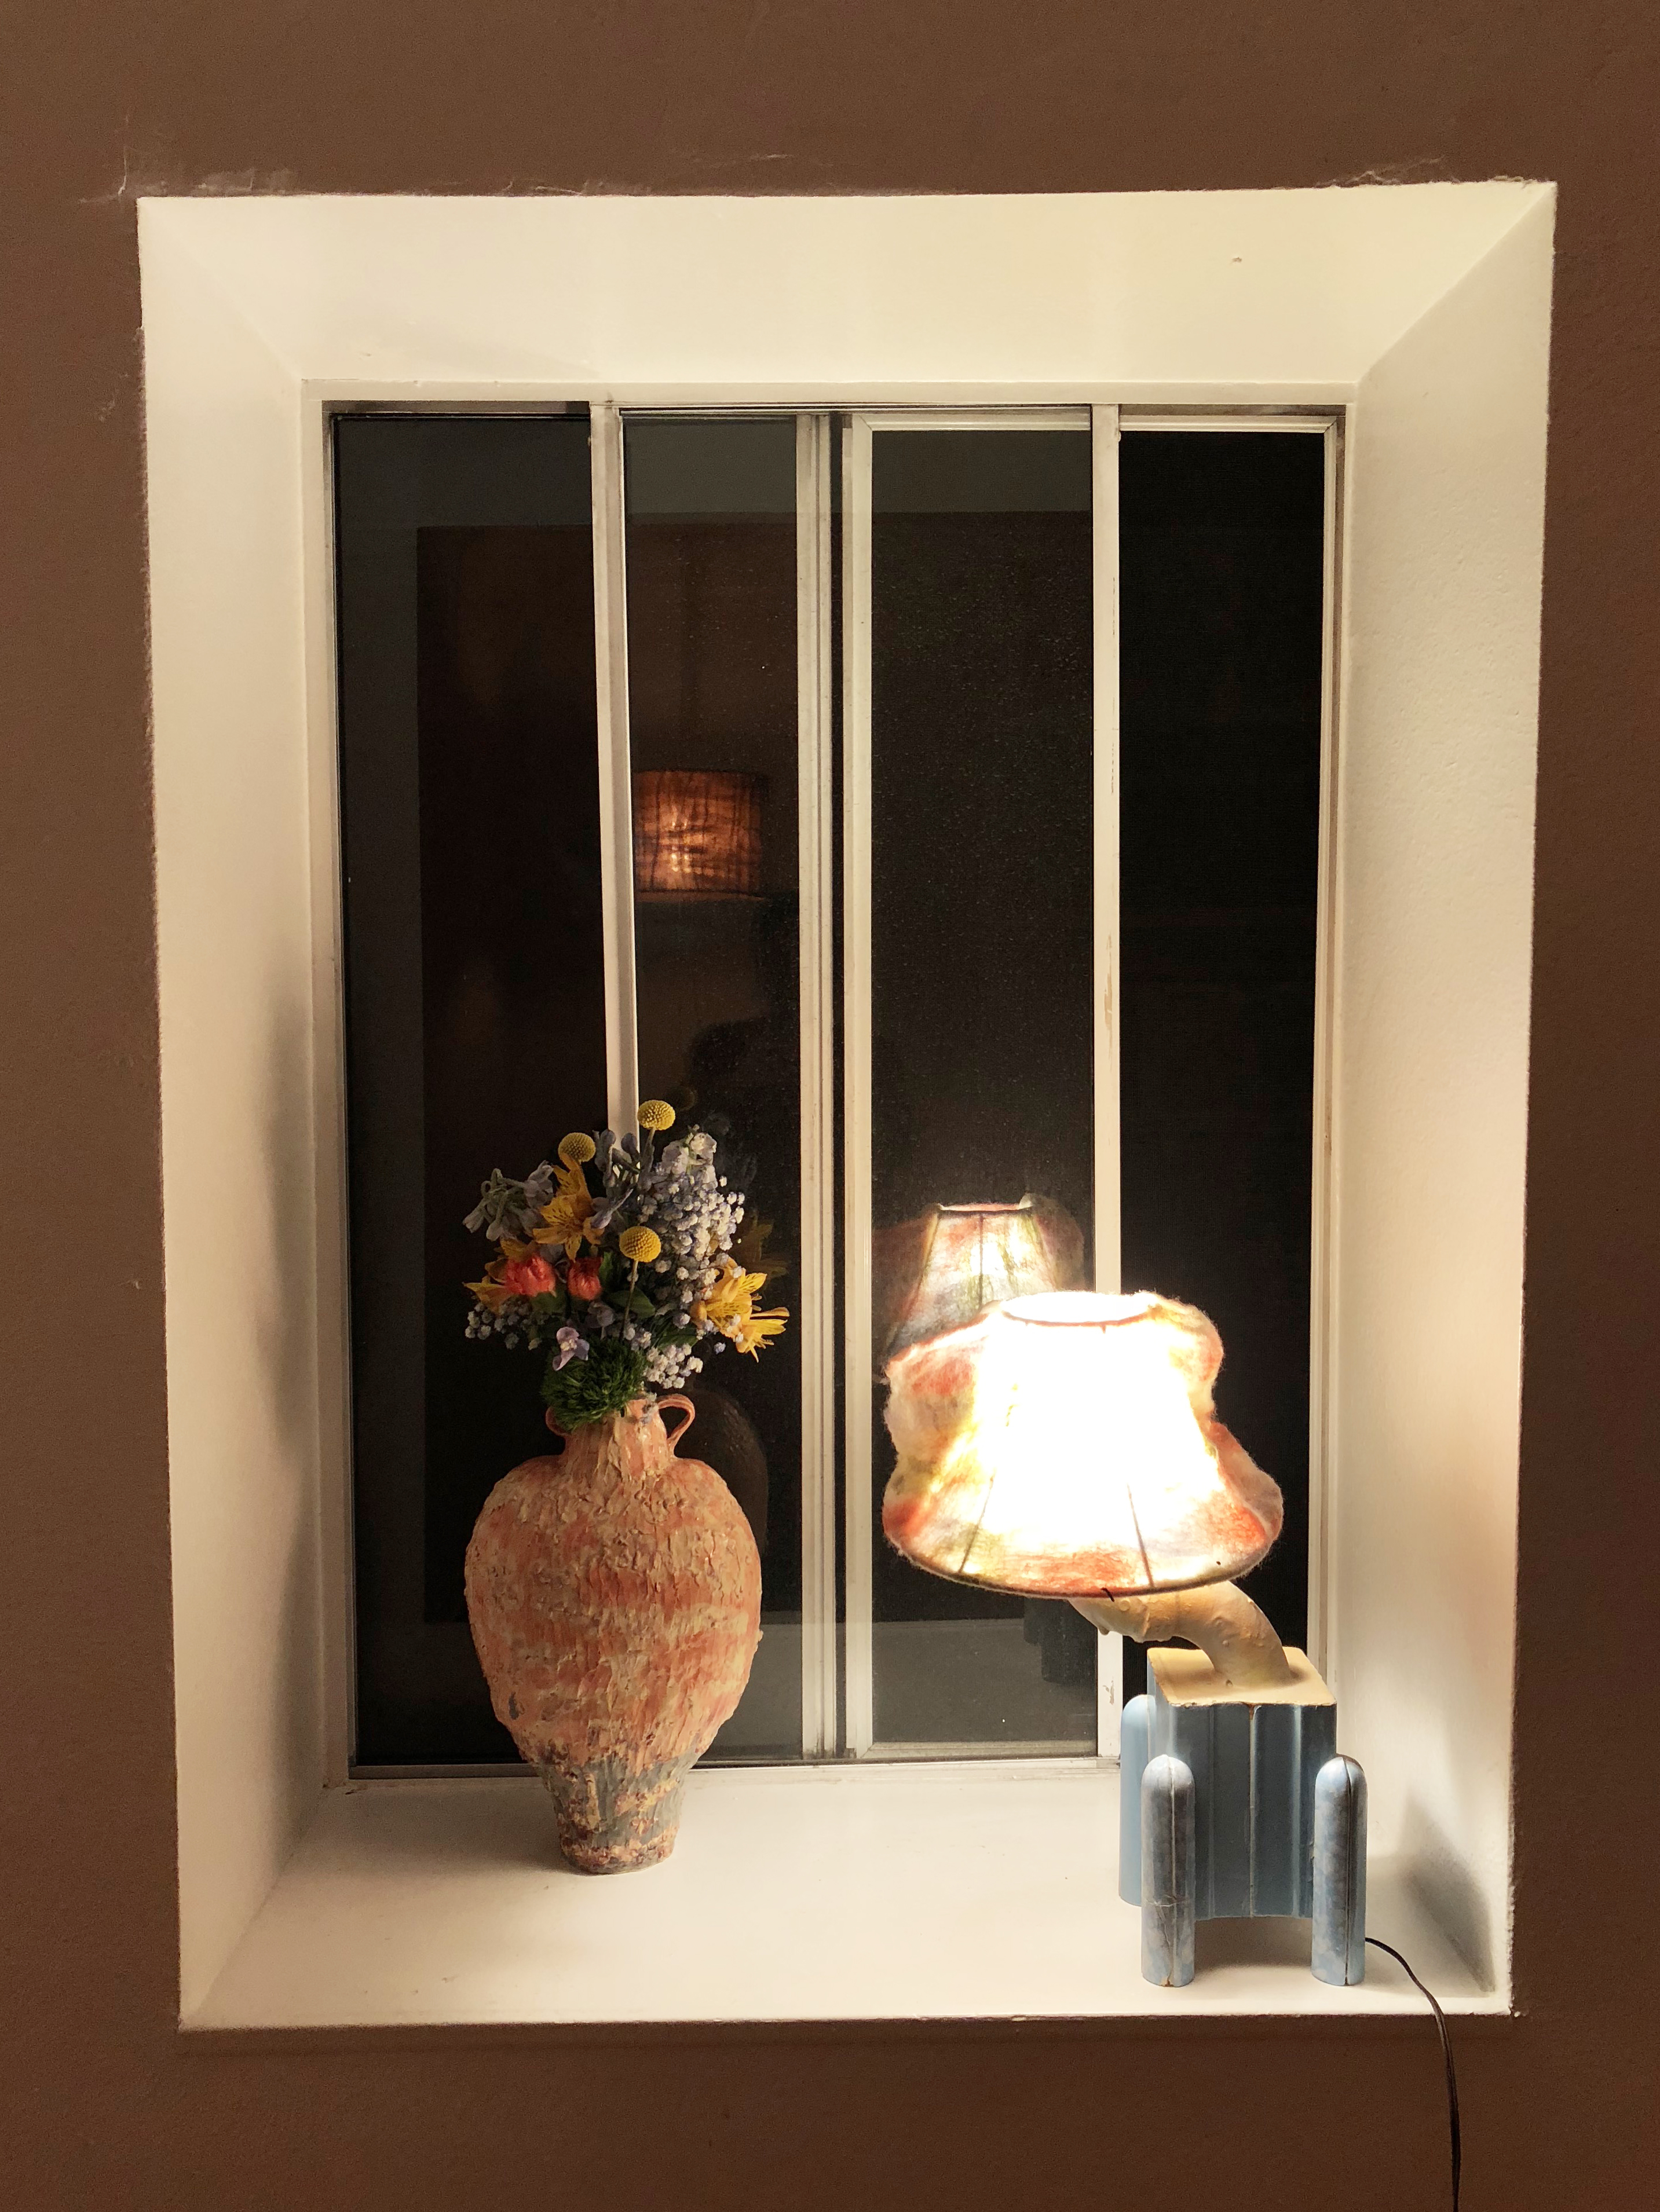 An orange ceramic vase with flowers and a felt lamp on a windowsill